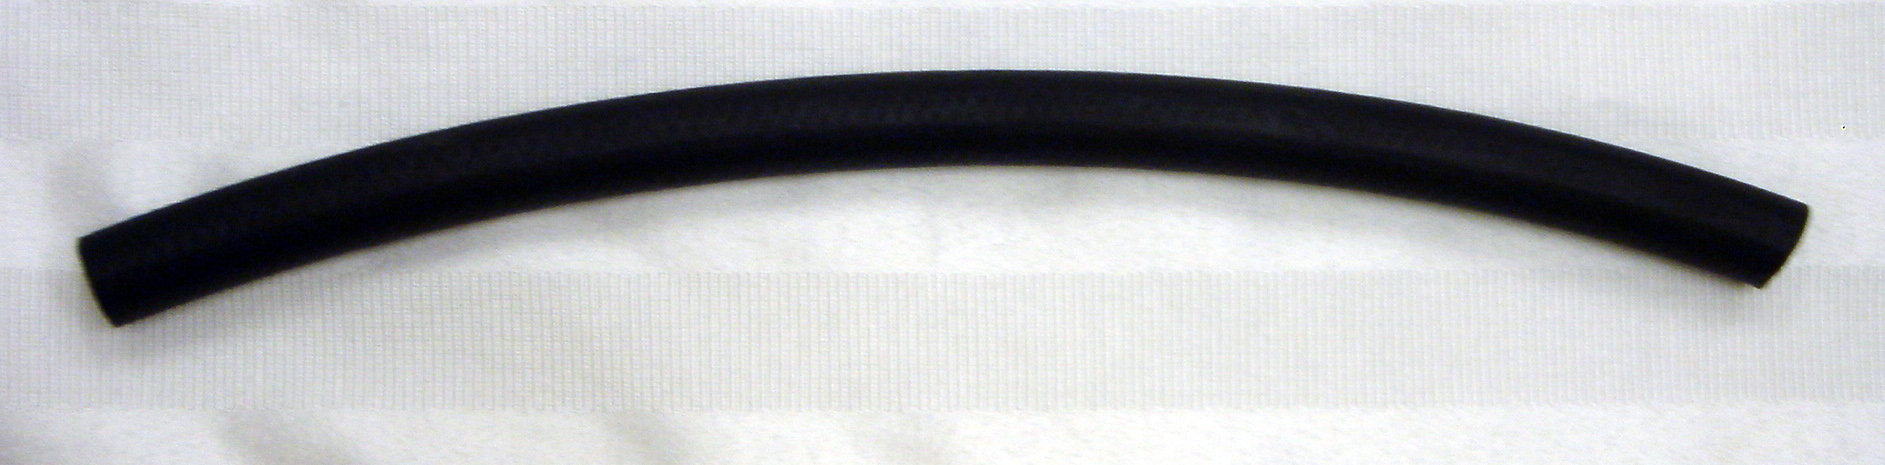 12-71120 Power Steering/ Atf Cooler Hose Per Foot For Early Bronco